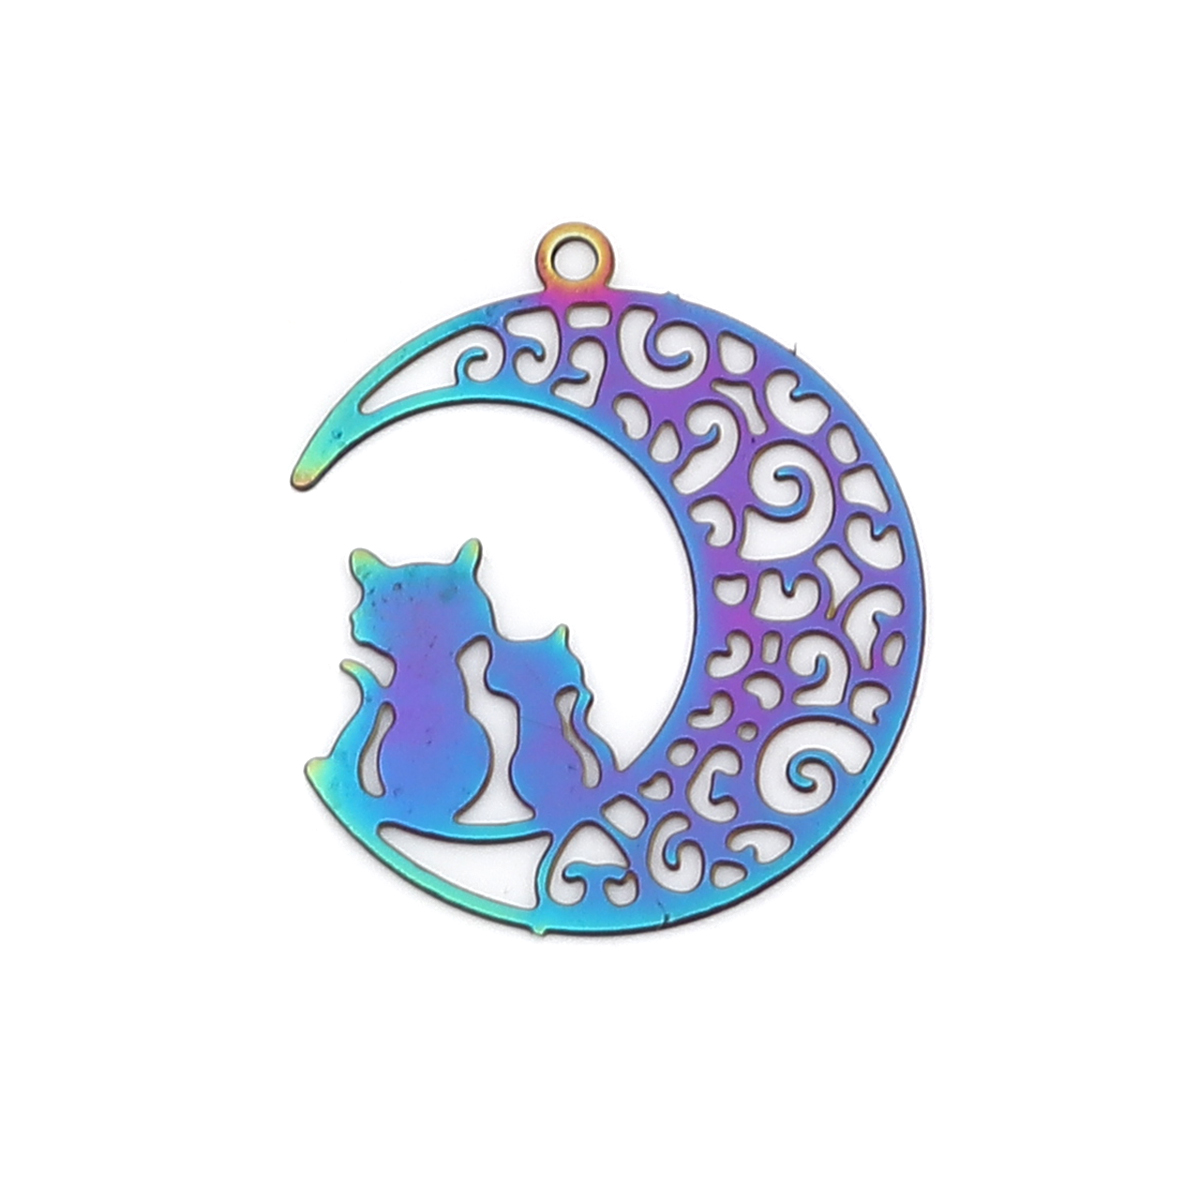 Picture of Stainless Steel Galaxy Charms Half Moon Purple & Blue Cat Filigree Stamping 22mm x 20mm, 10 PCs